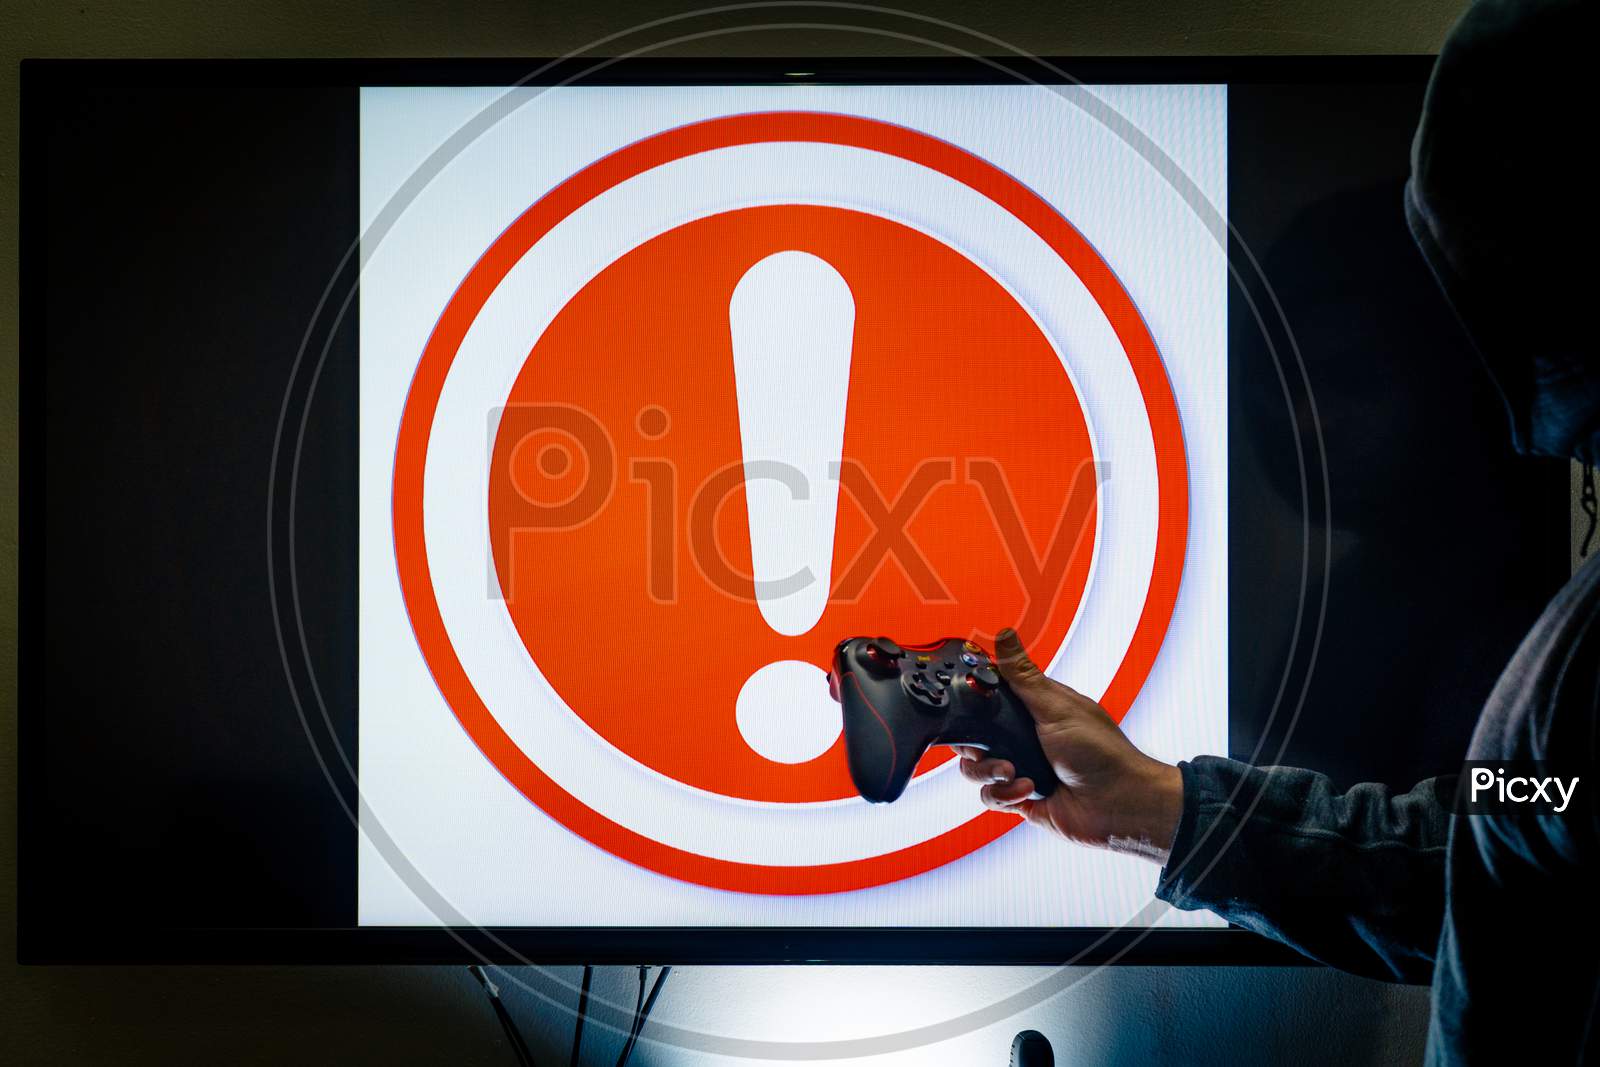 Man In Hood Holding Controller In Front Of Screen Showing An Alert Red Exclamation Message As A Game Crashes Due To Bugs, Hacks Or Issues